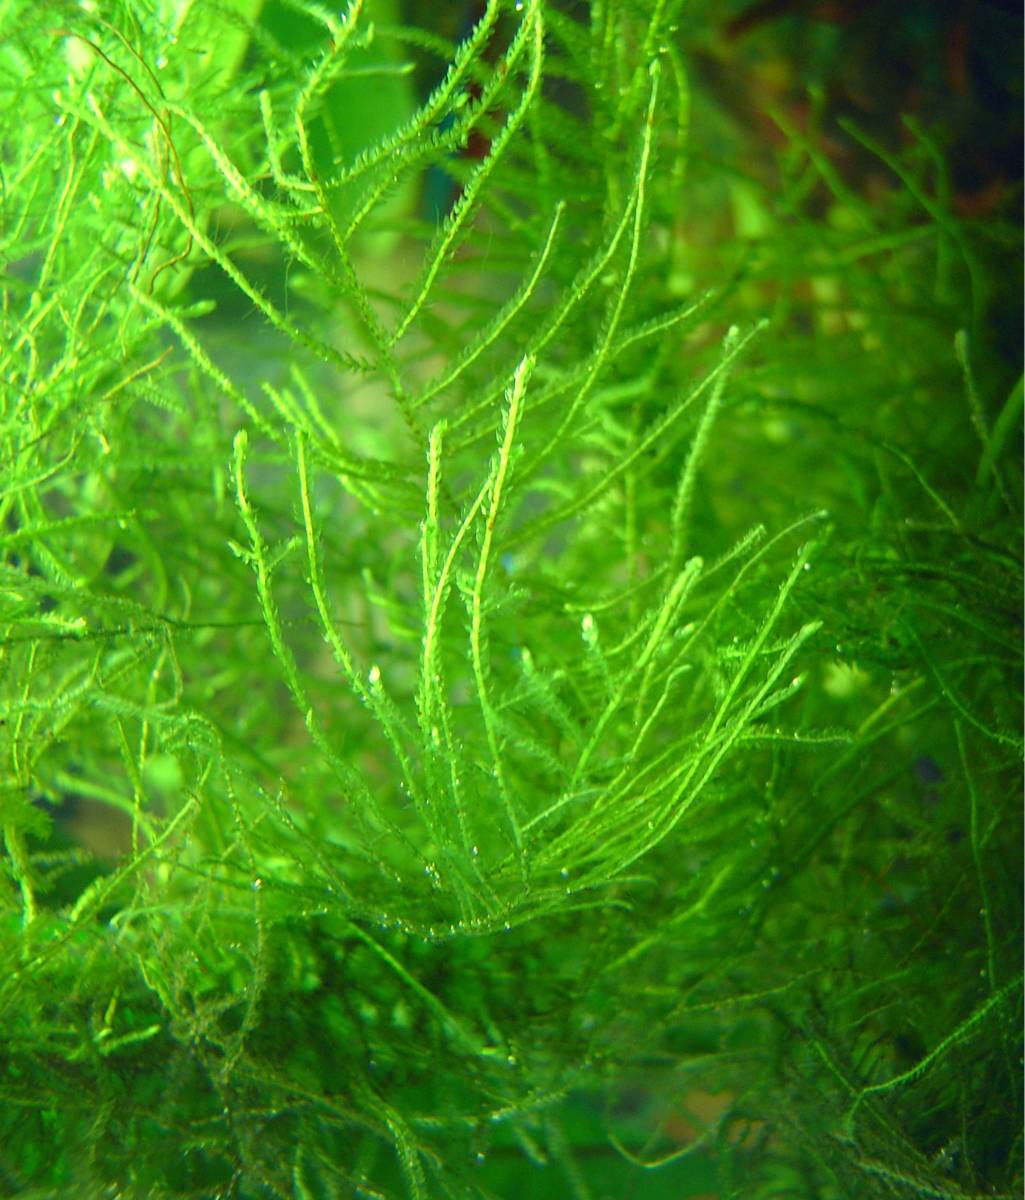 Java Moss is often used in aquariums. Goldfish will chew on moss, but moss replenishes quickly.